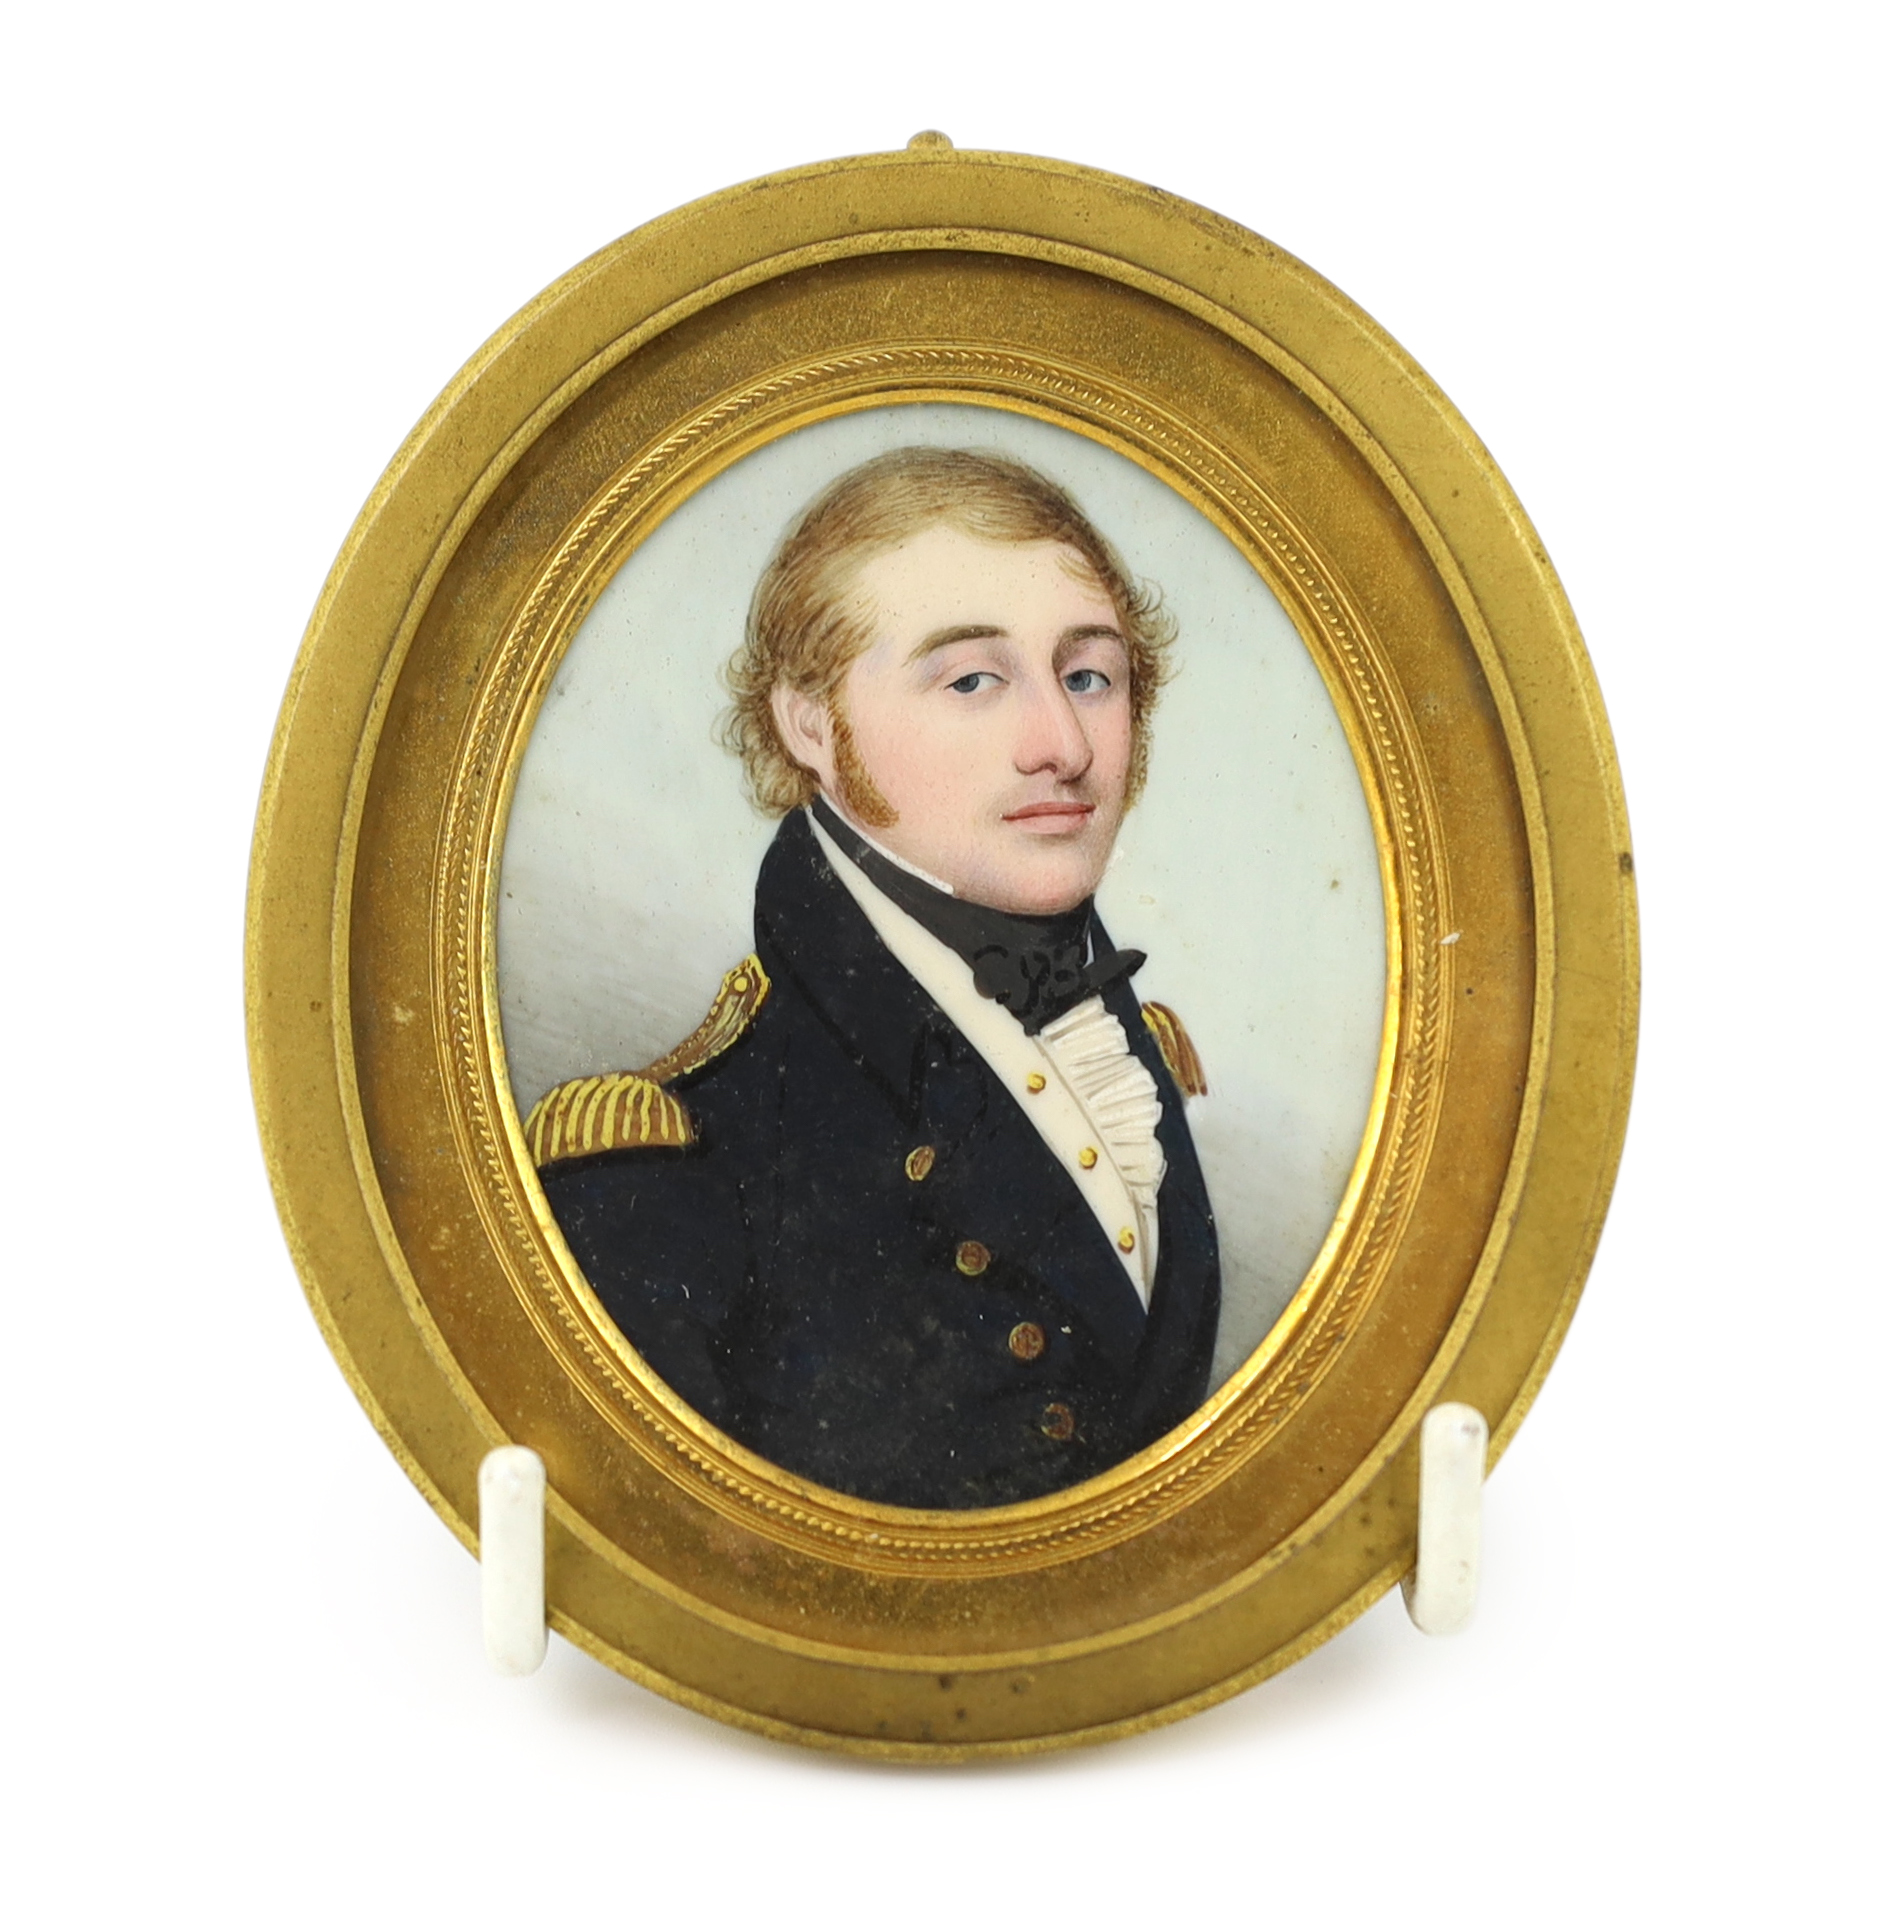 Frederick Buck (Irish, 1771-1840), Portrait miniature of a naval officer, watercolour on ivory, 6.3 x 5cm. CITES Submission reference 8A2S9SYD